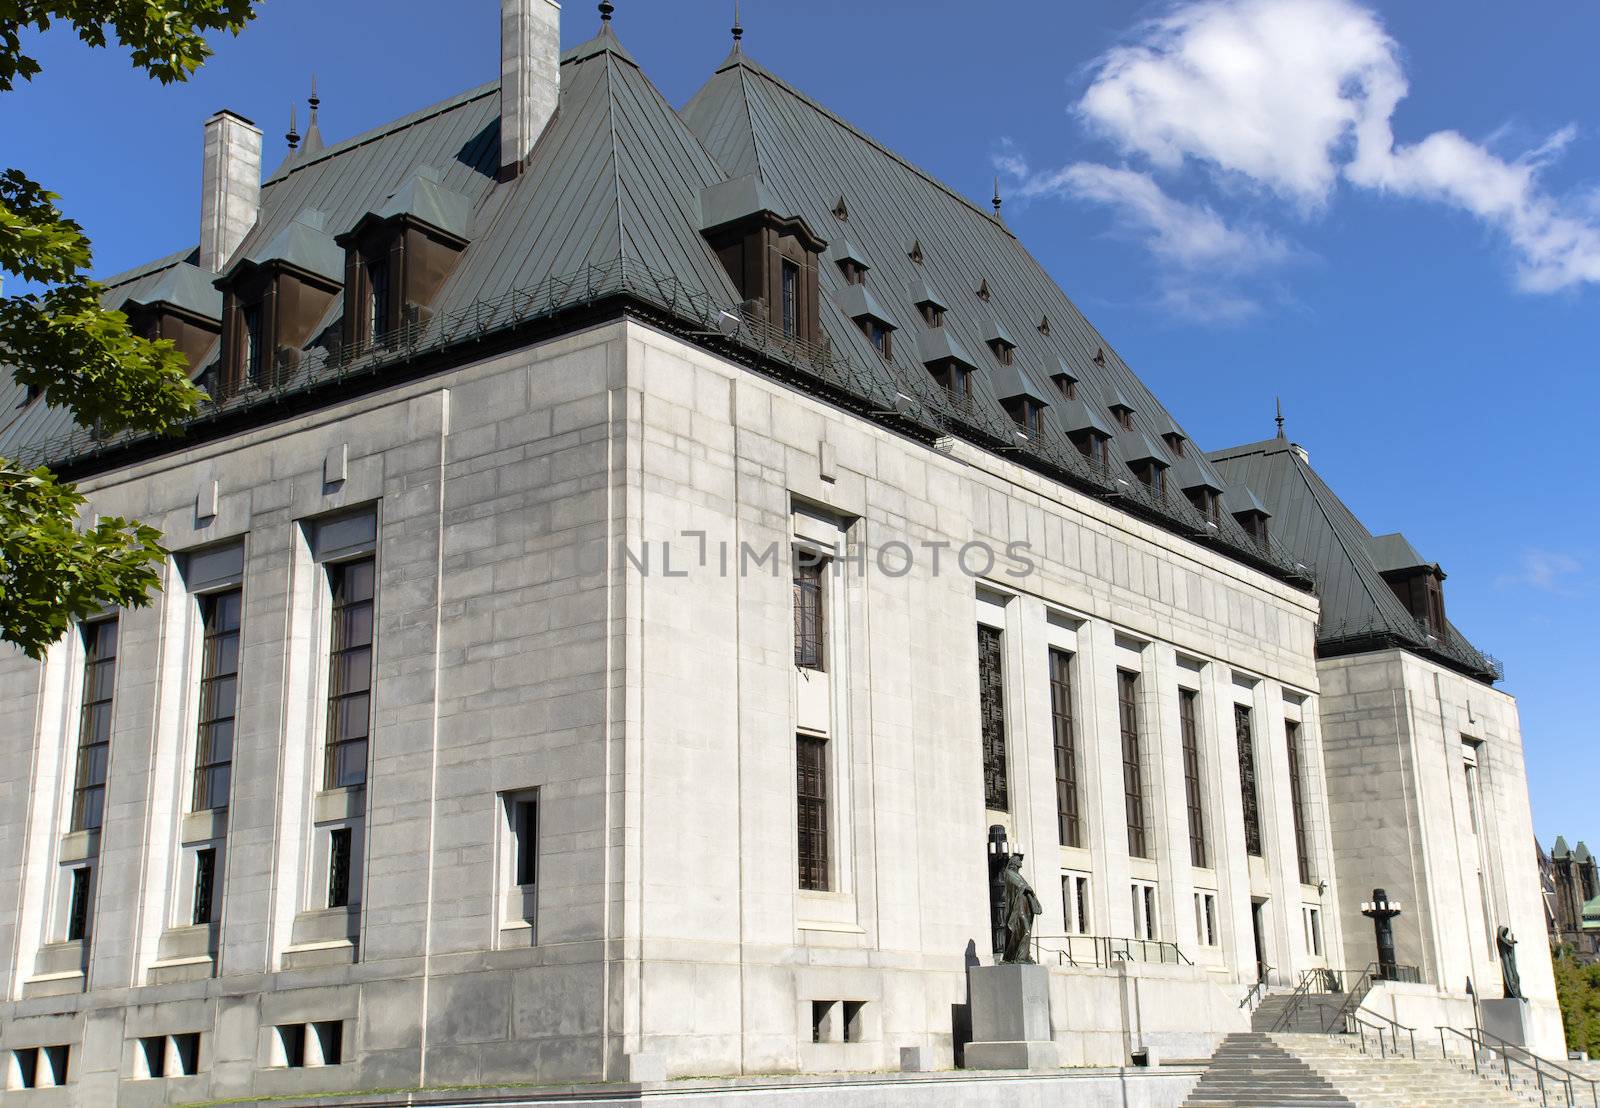 Supreme Court of Canada by michelloiselle